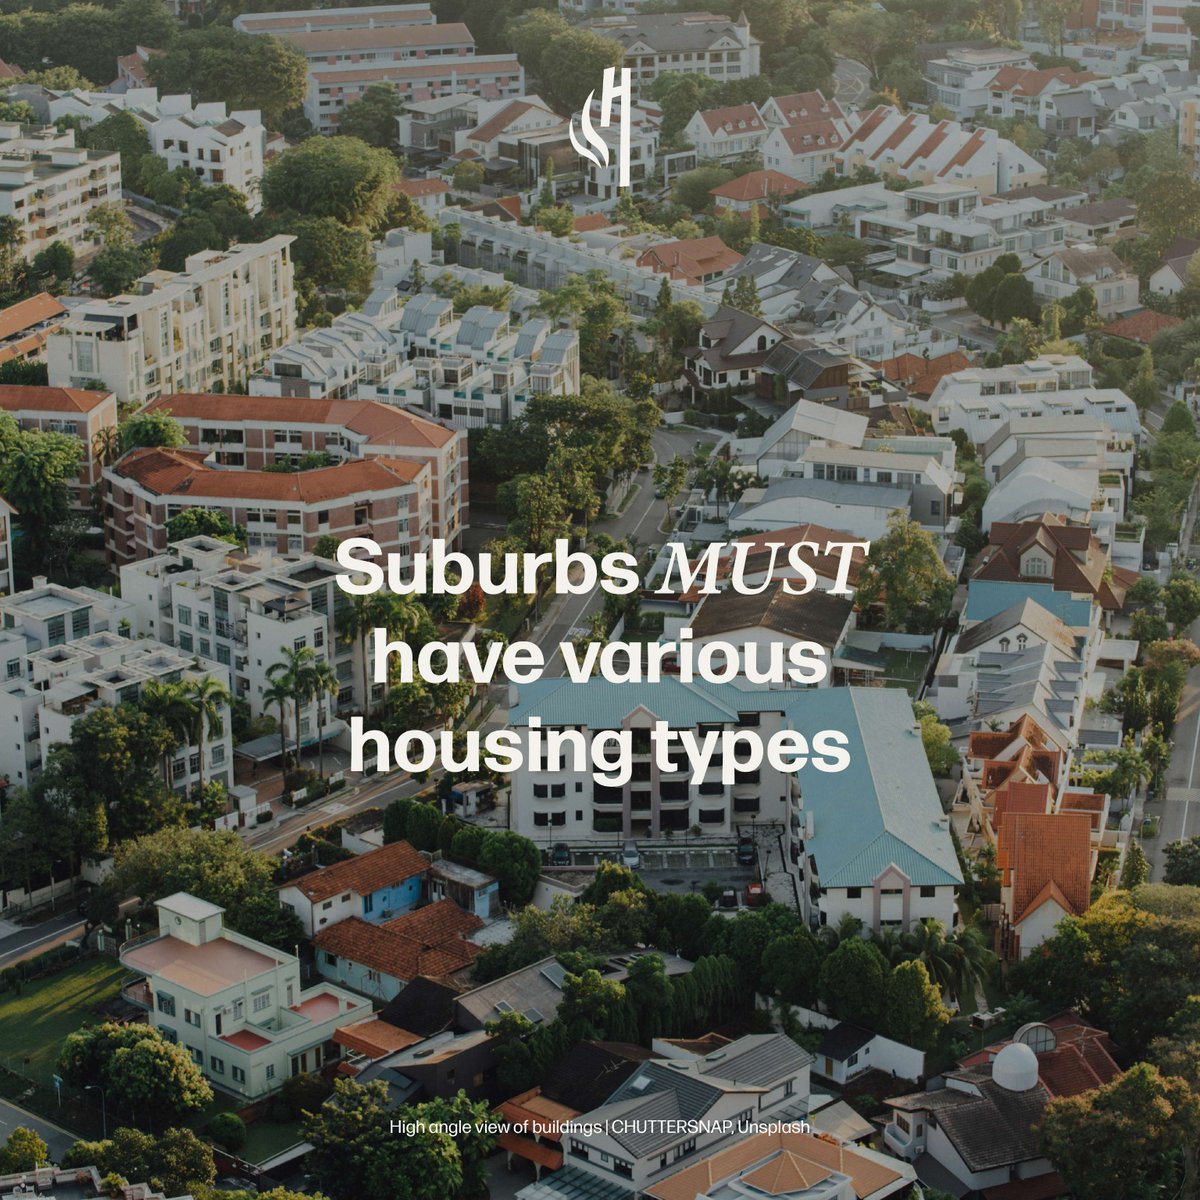 Housing types like apartments, townhouses, & student accommodations bring vibrant communities & central spots while preserving space for parks & communal areas. 

These benefits are key for suburban vitality and heat reduction! 🔥🏘️

#Walkability #HousingCrisis #Housing